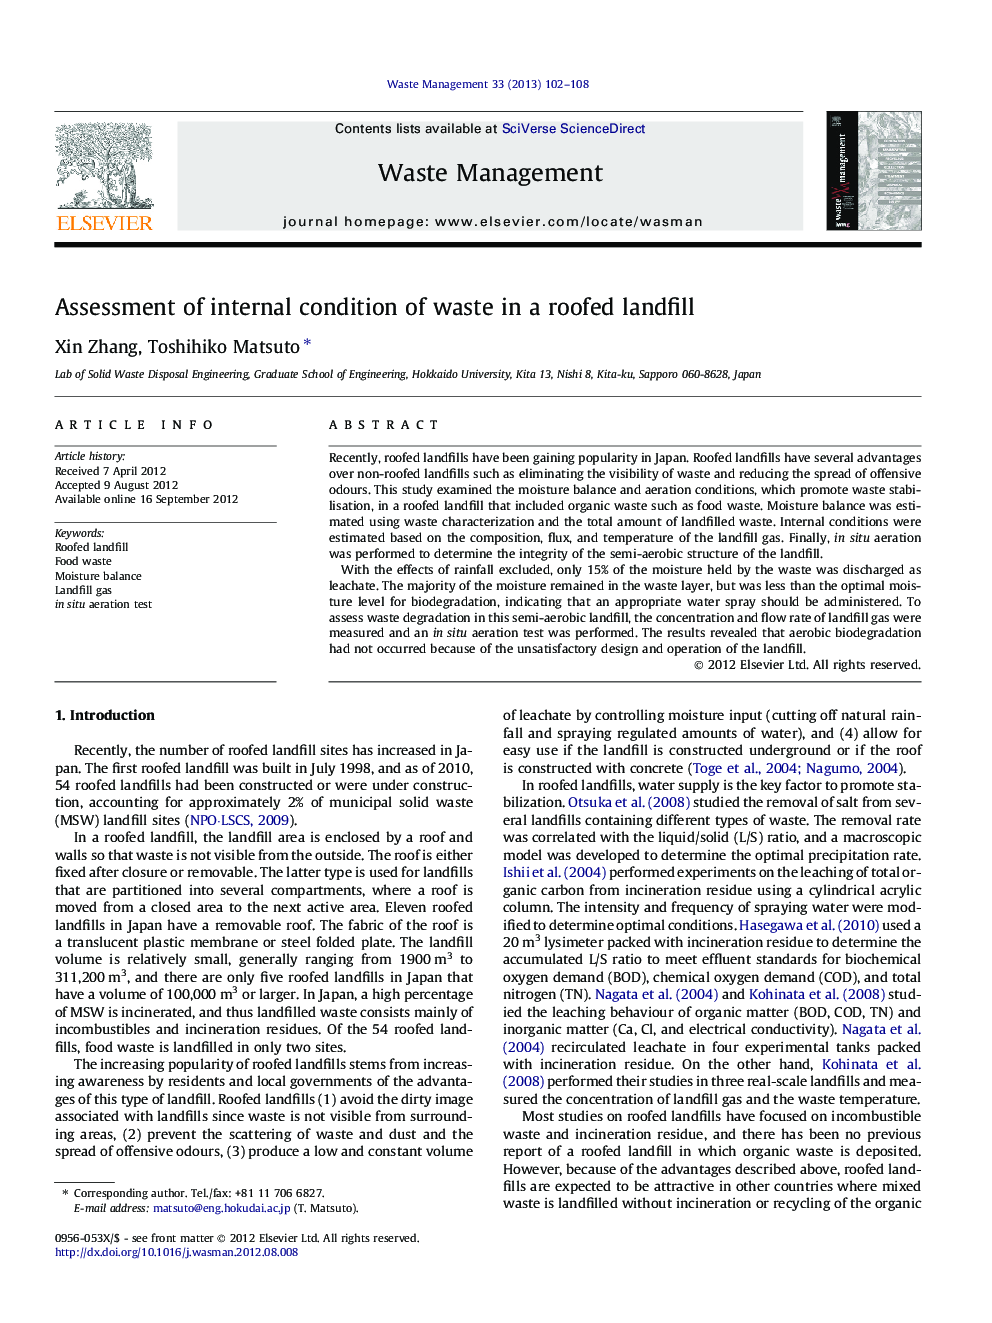 Assessment of internal condition of waste in a roofed landfill